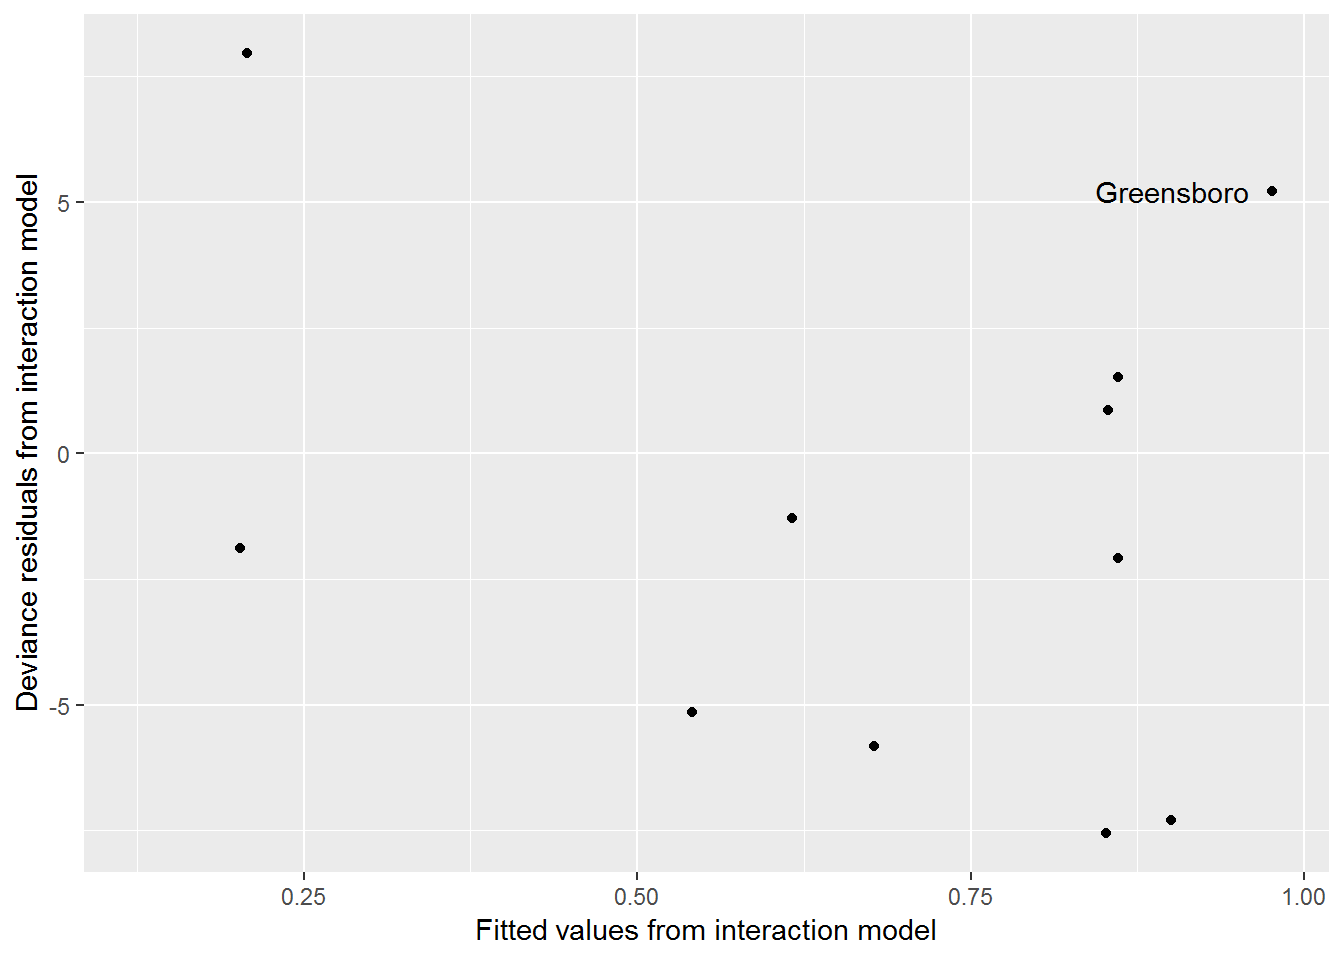 Fitted values by residuals for the interaction model for the Railroad Referendum data.